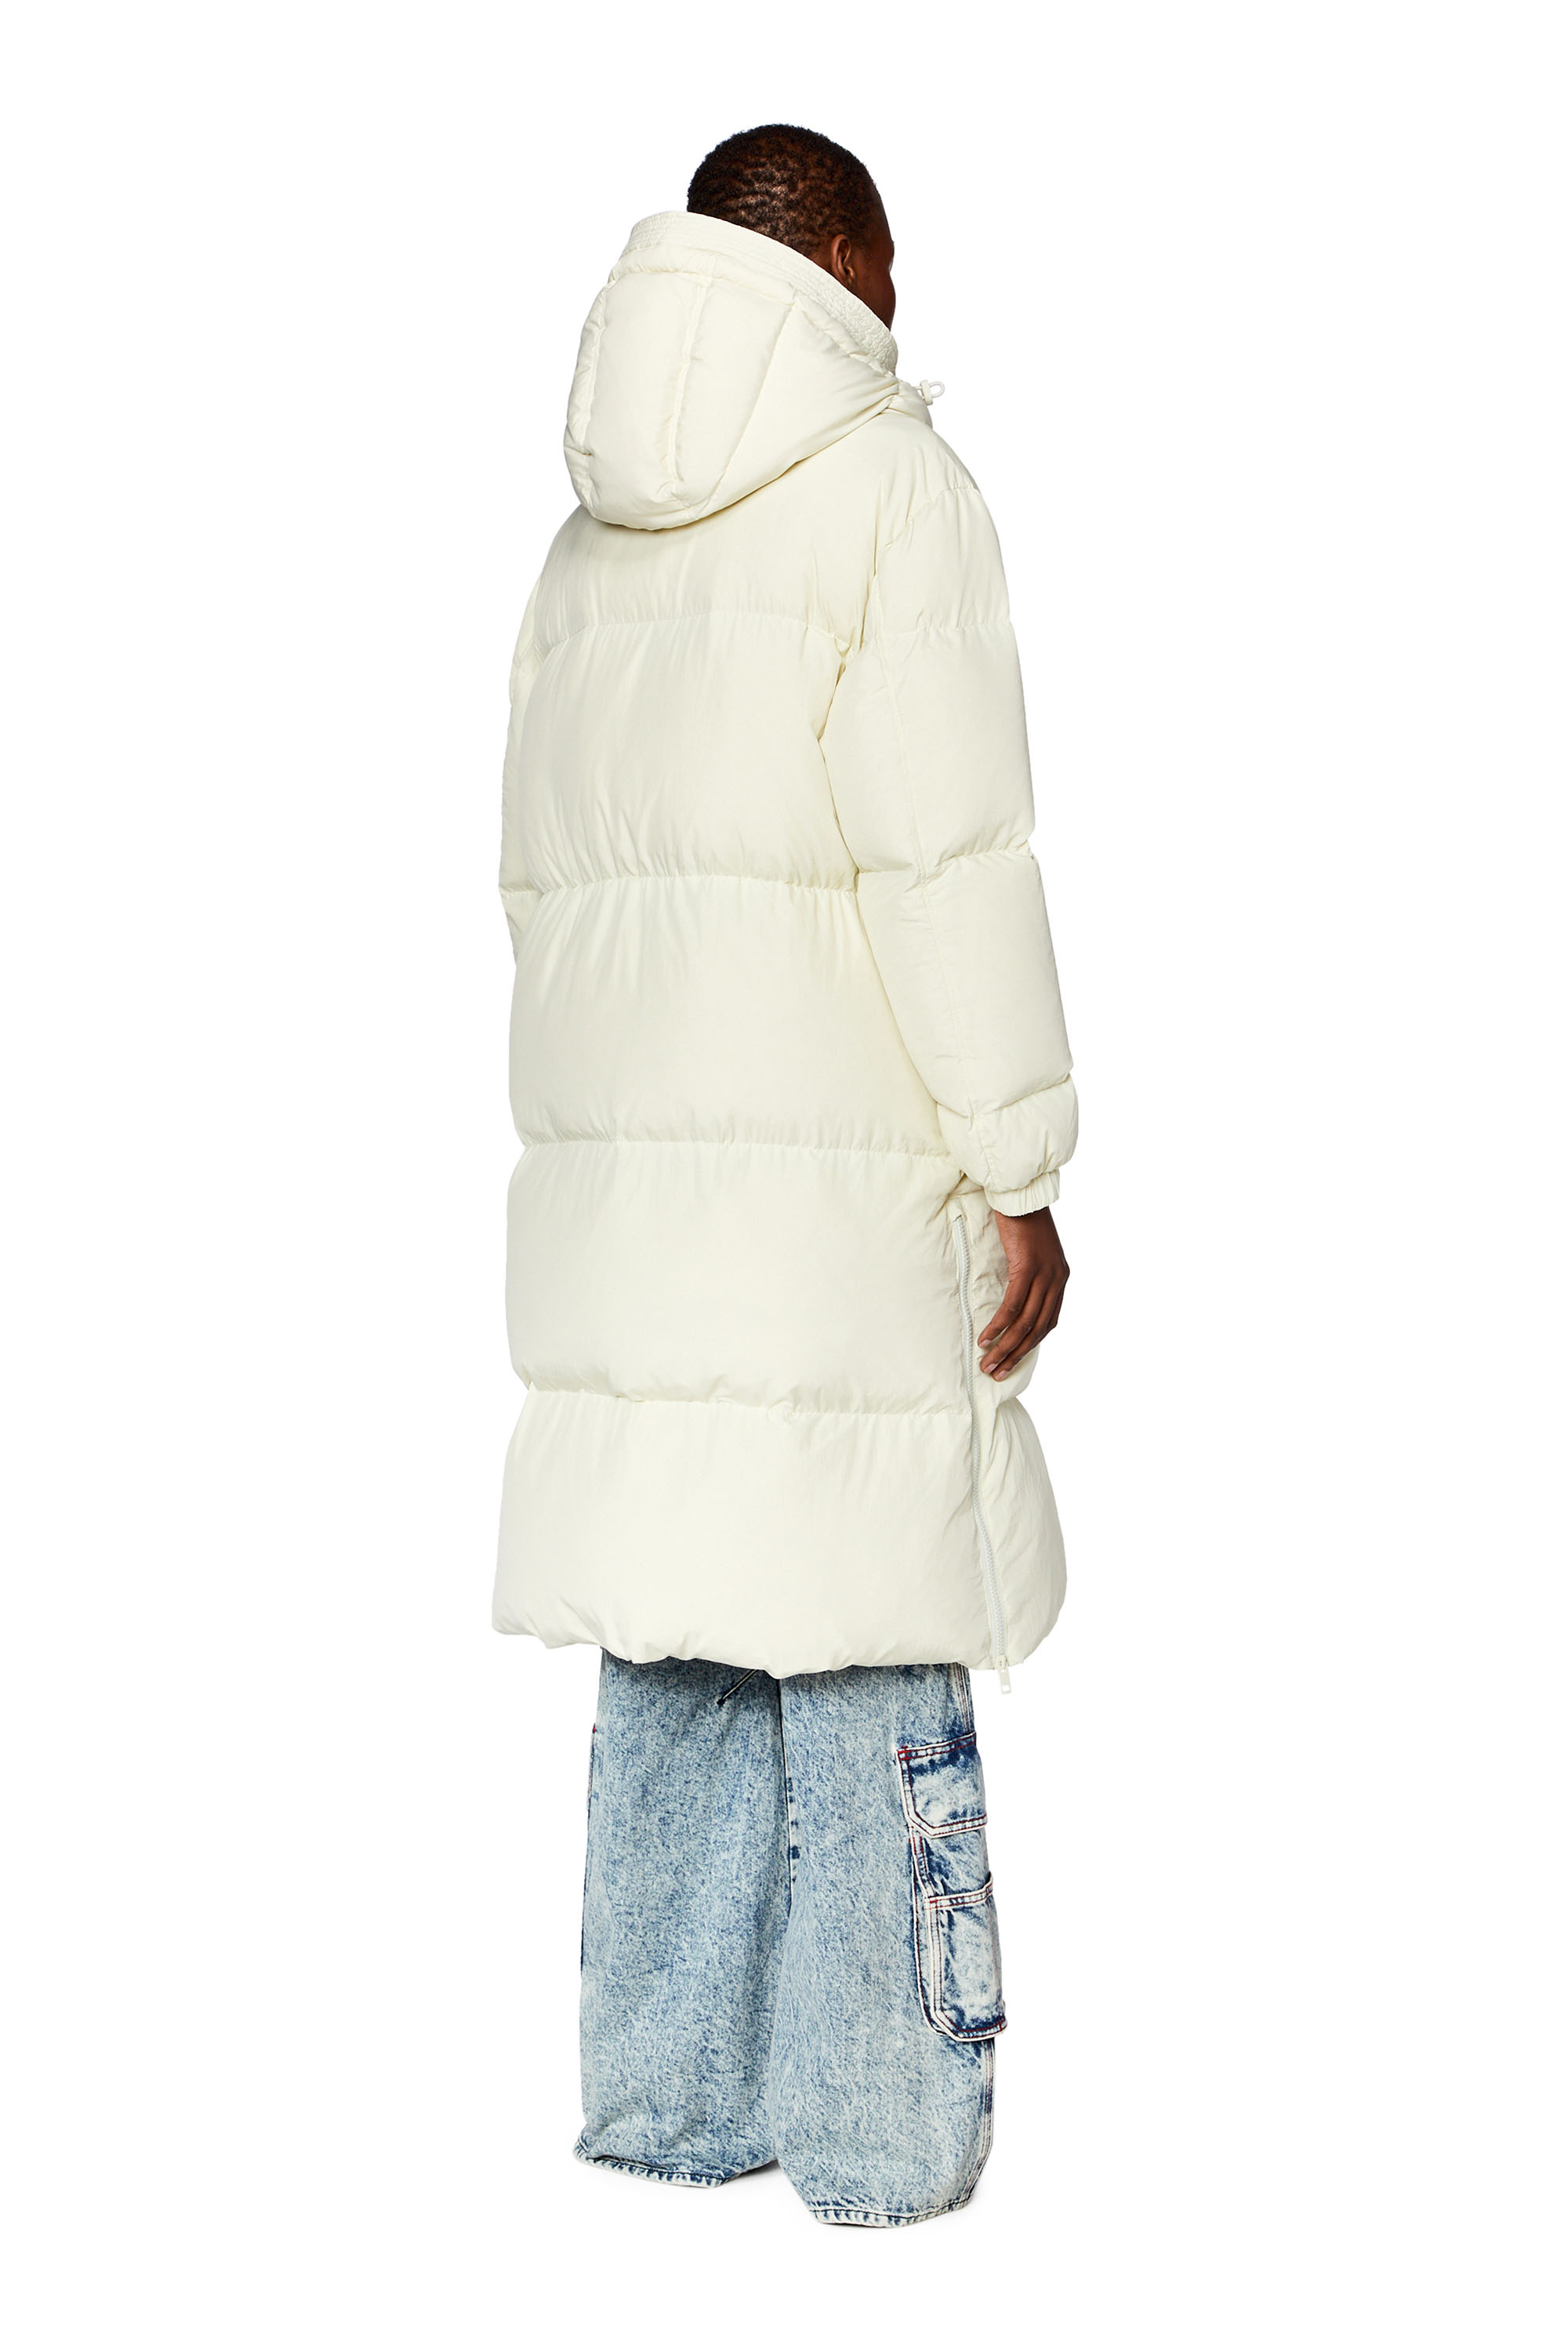 SEMIR 90% Women Seamless Down Parka Windproof, Hooded, Warm Winter Coat For  Snowy Weather Loose Long Female Down Coat HKD230719 From Mbck, $54.2